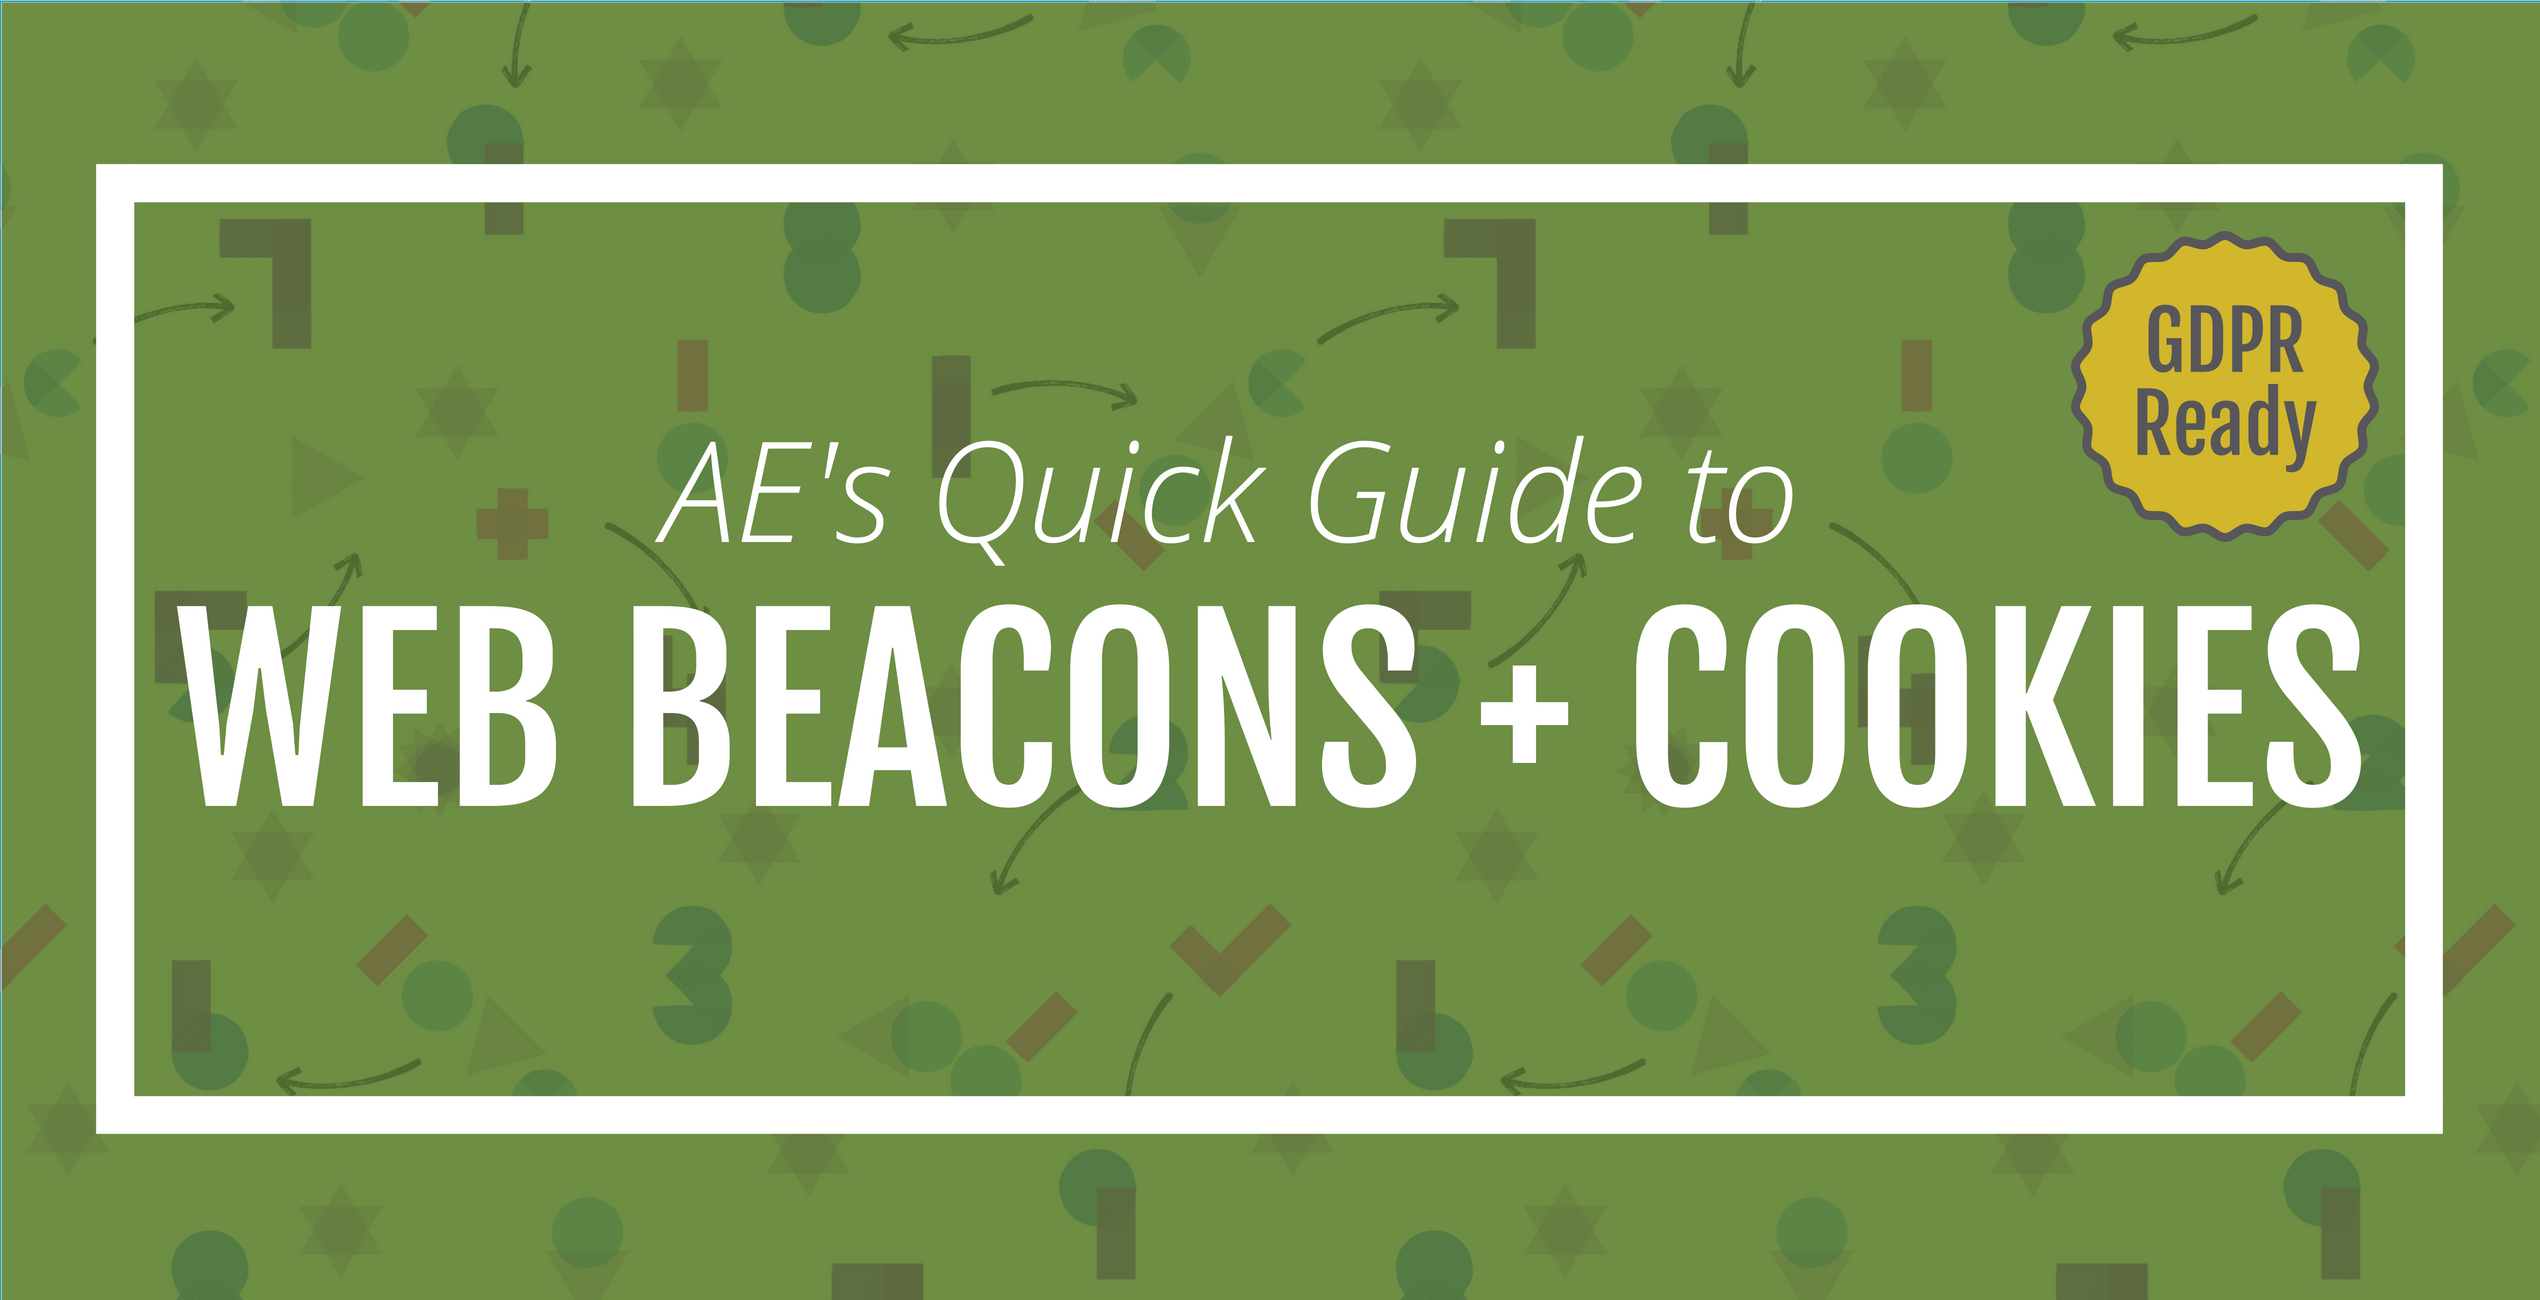 AE's Quick Guide to Web Beacons and Cookies